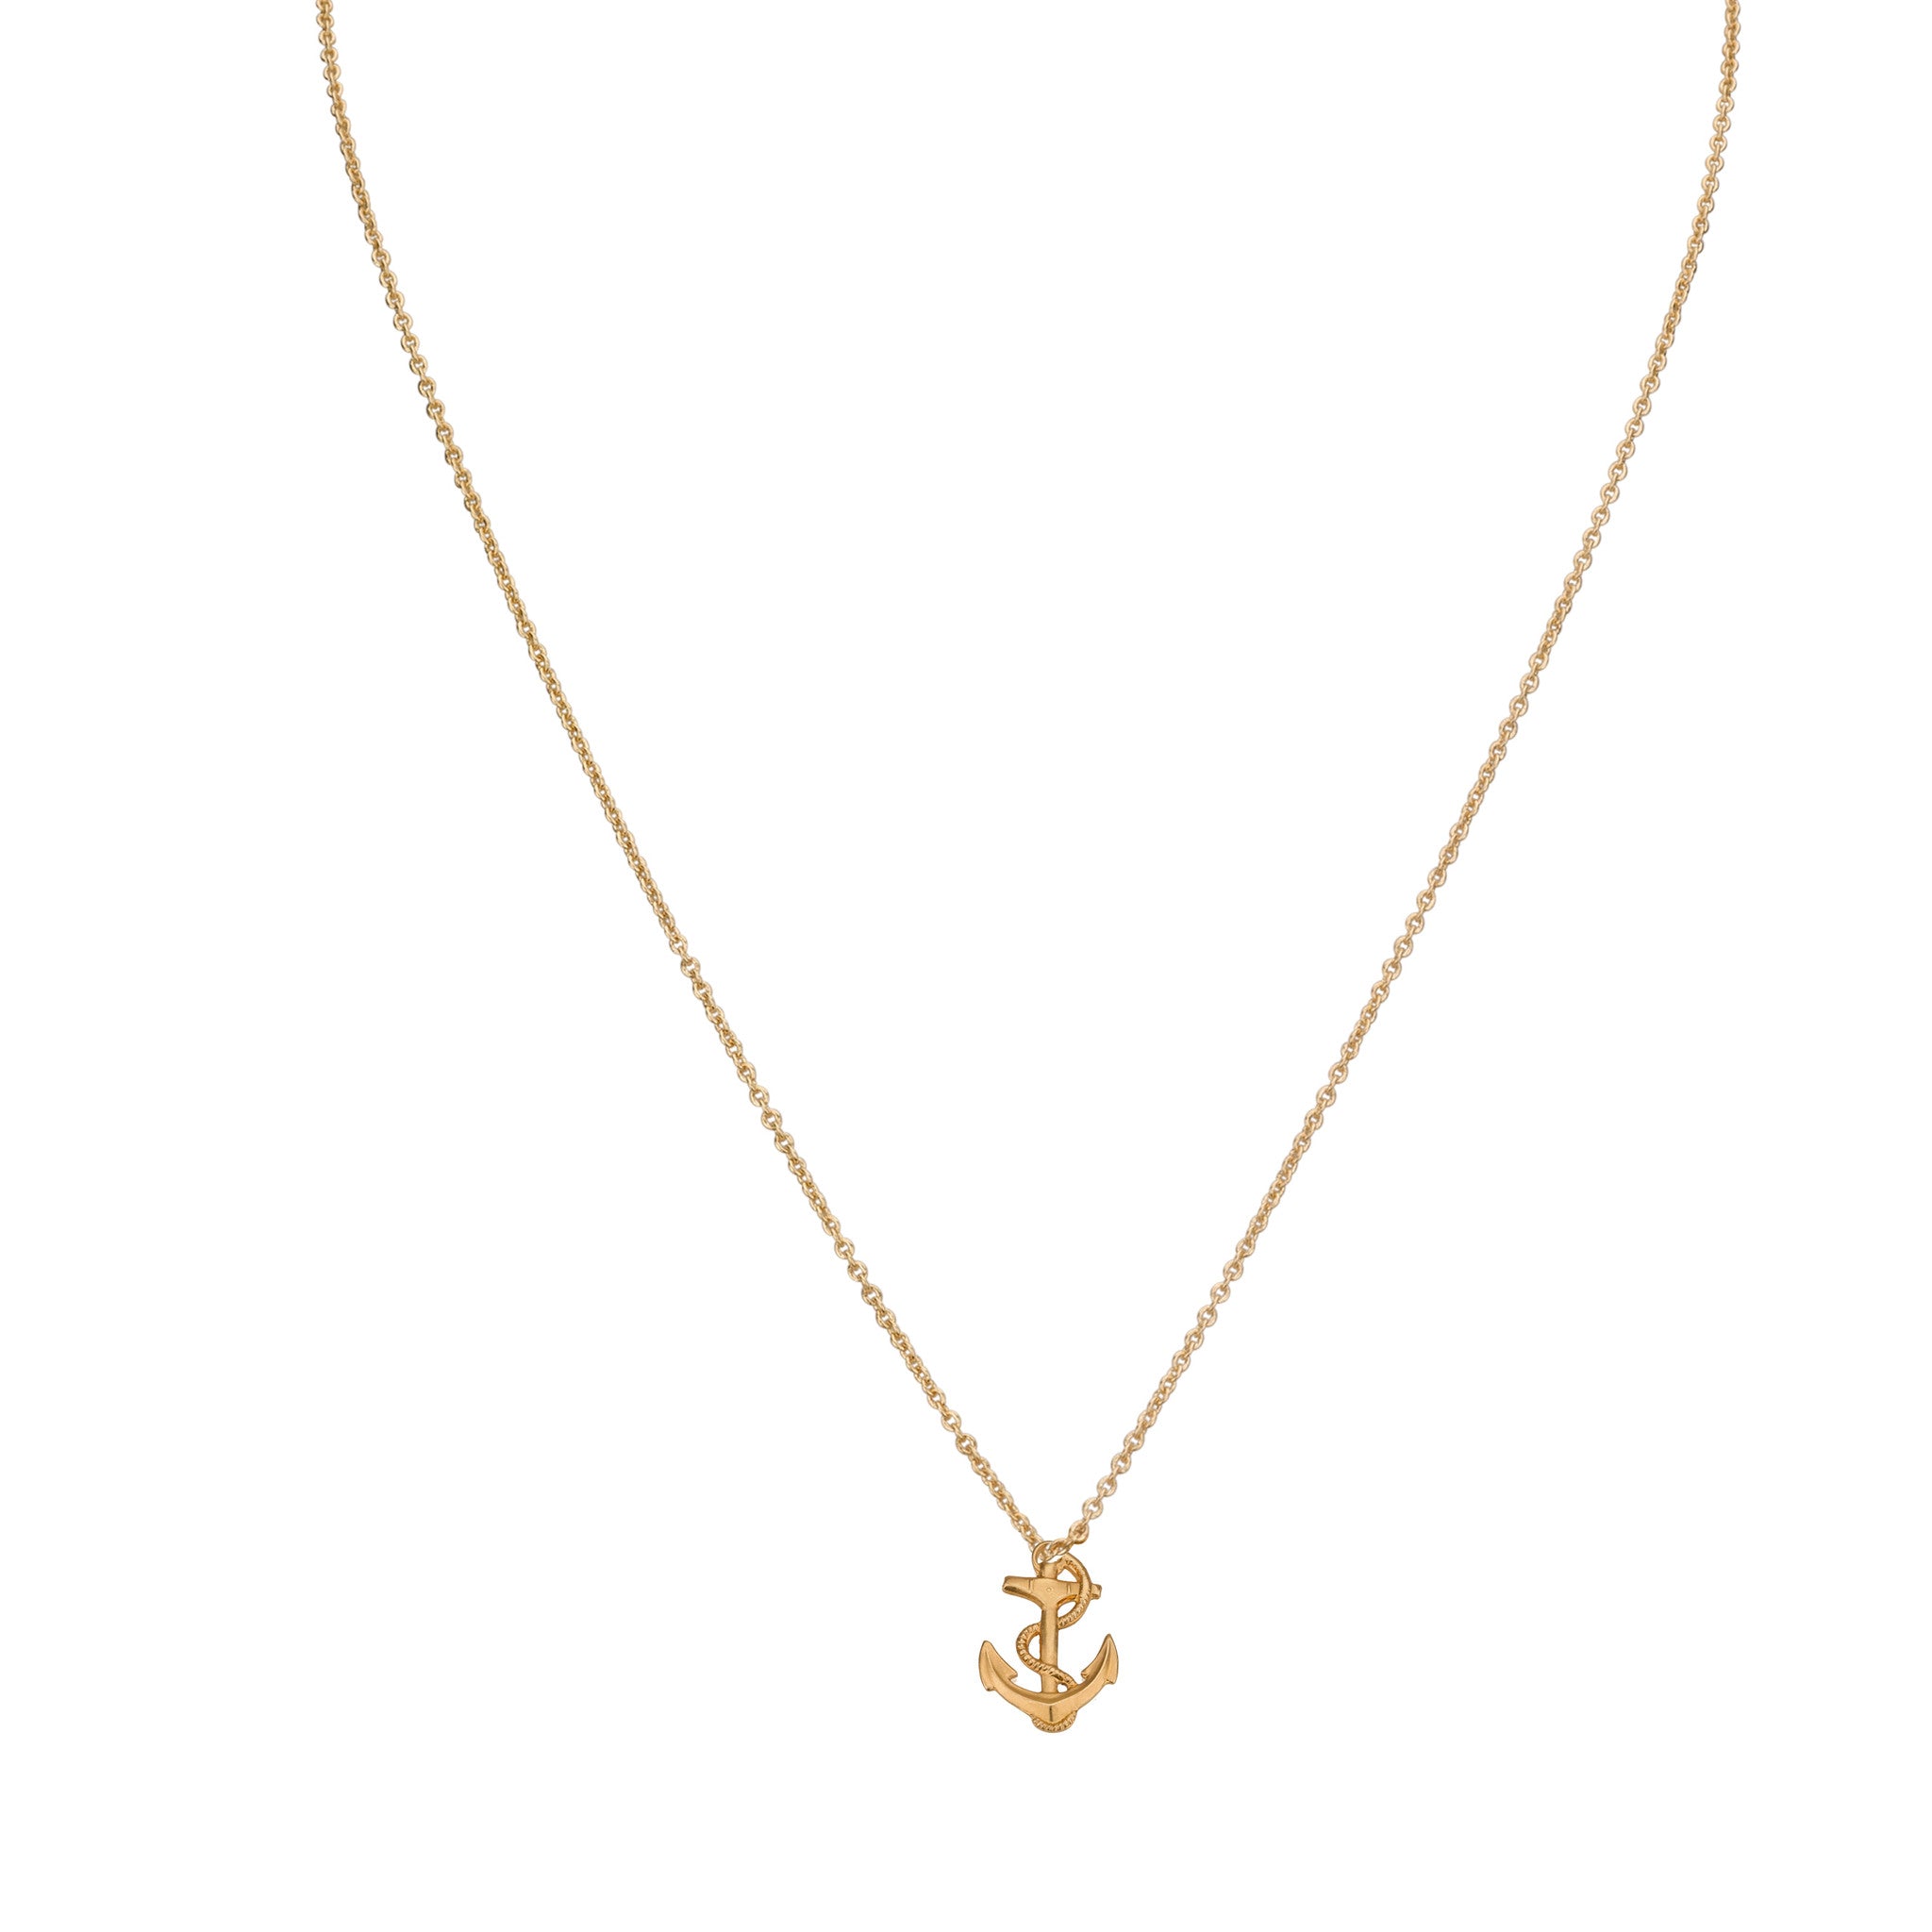 Necklaces - Small Anchor & Helen Chain Necklace